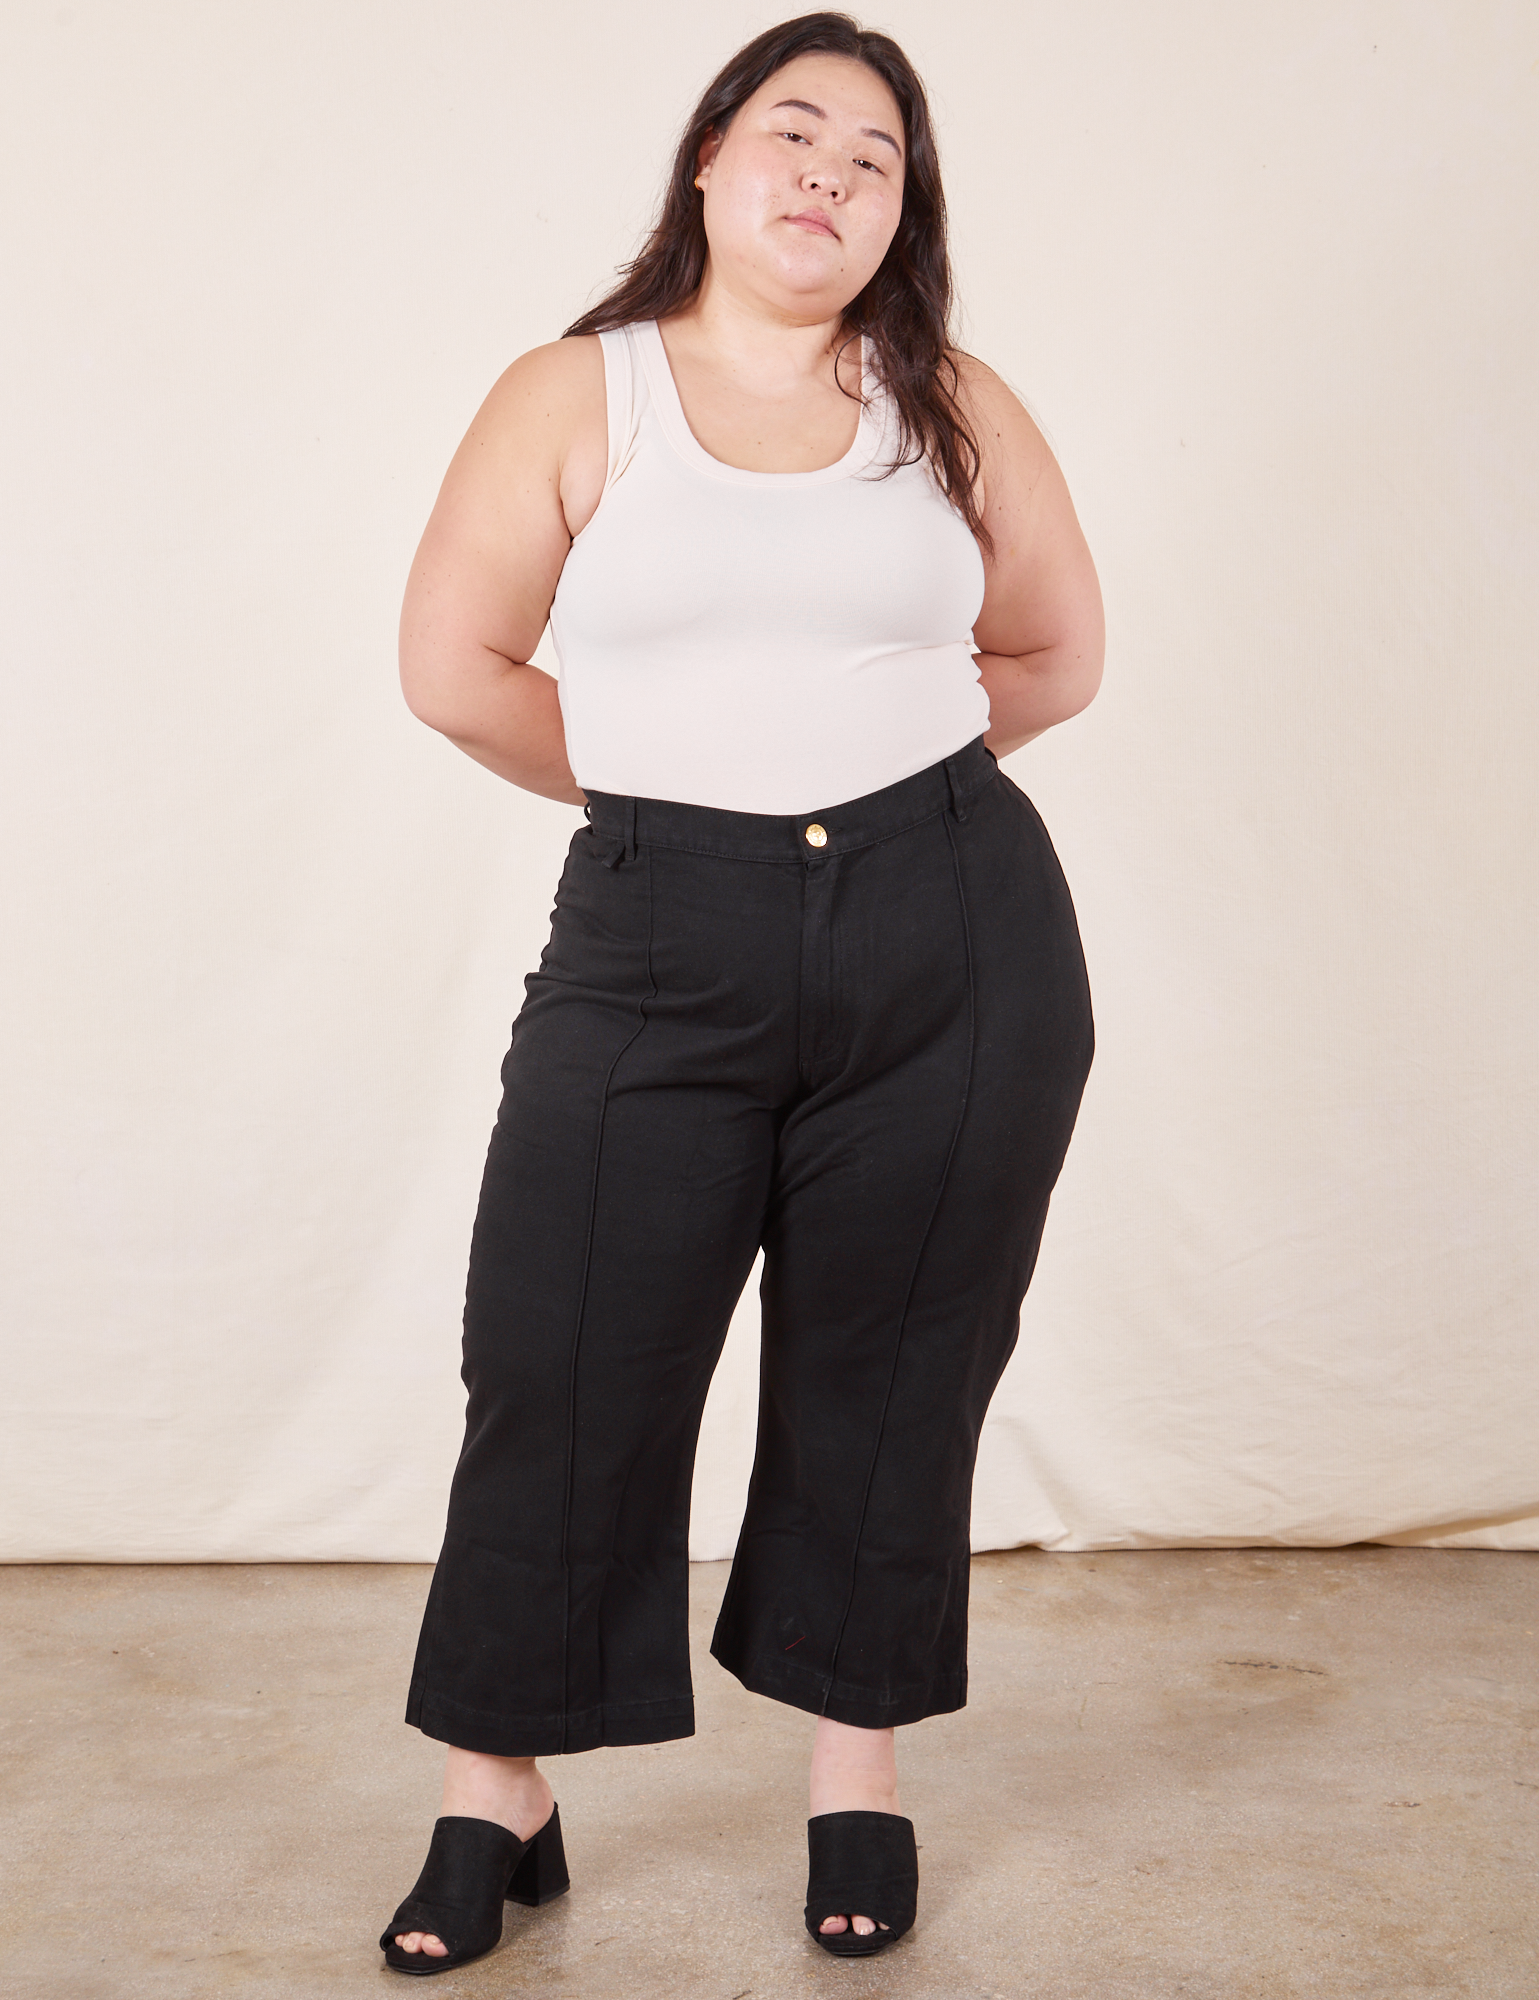 Ashley is 5&#39;7 and wearing 1XL Petite Western Pants in Basic Black paired with Tank Top in vintage tee off-white